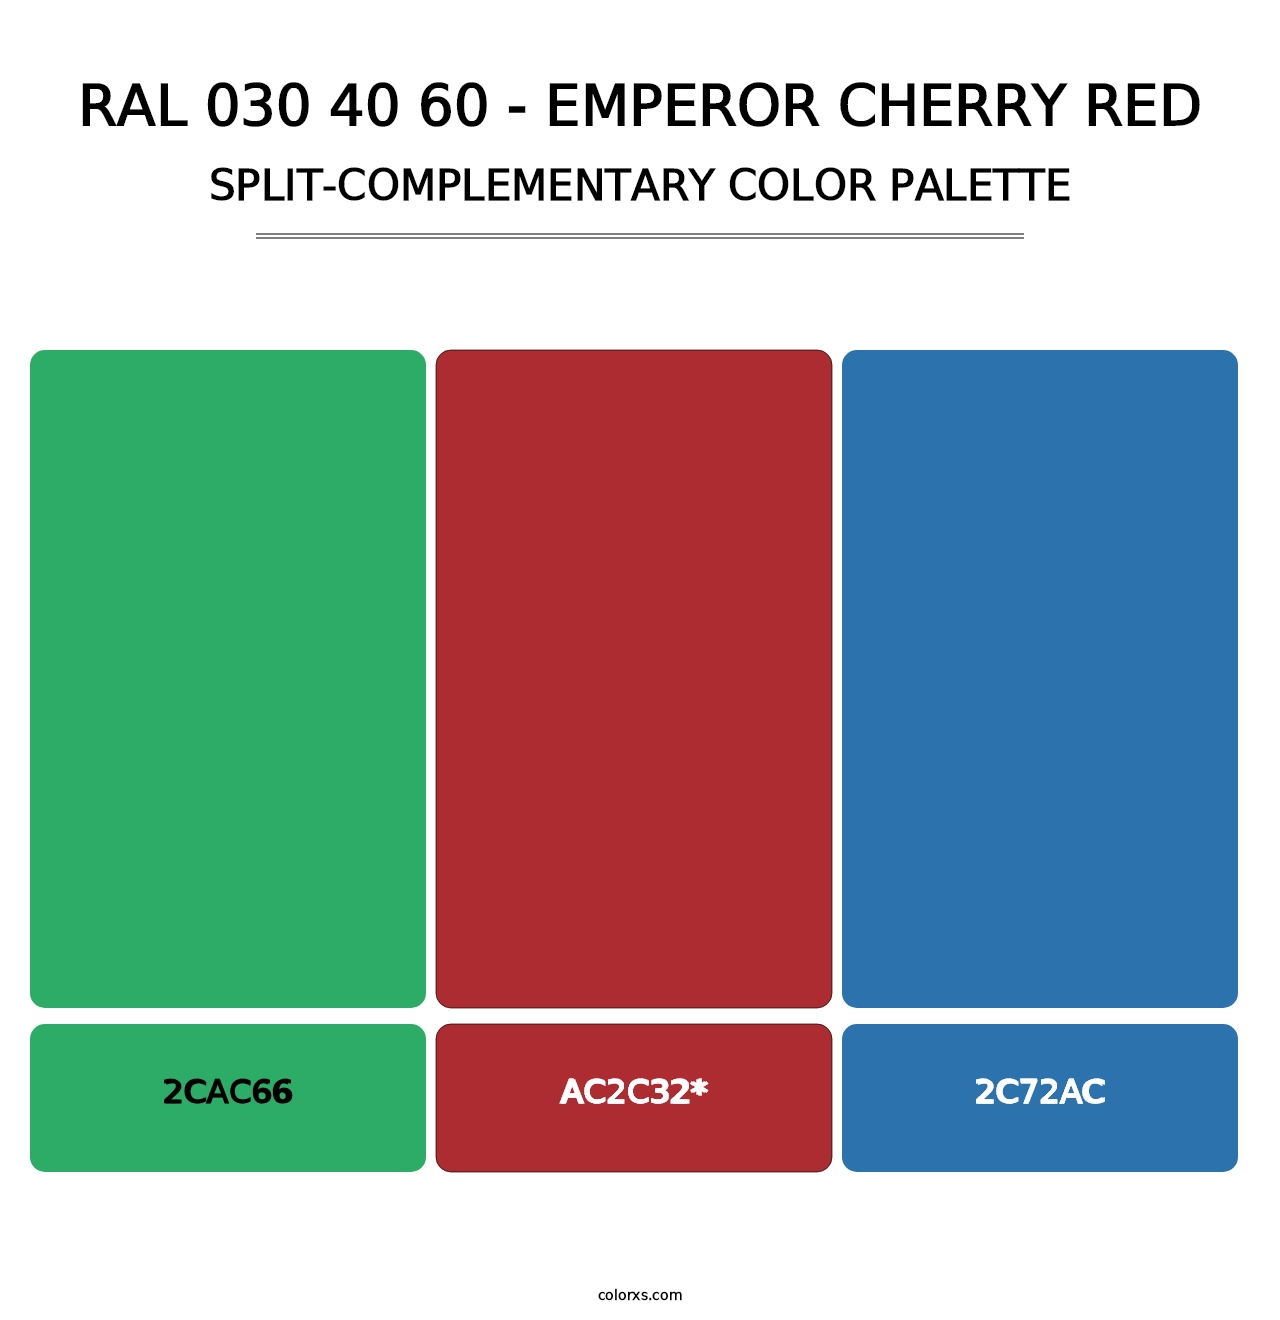 RAL 030 40 60 - Emperor Cherry Red - Split-Complementary Color Palette